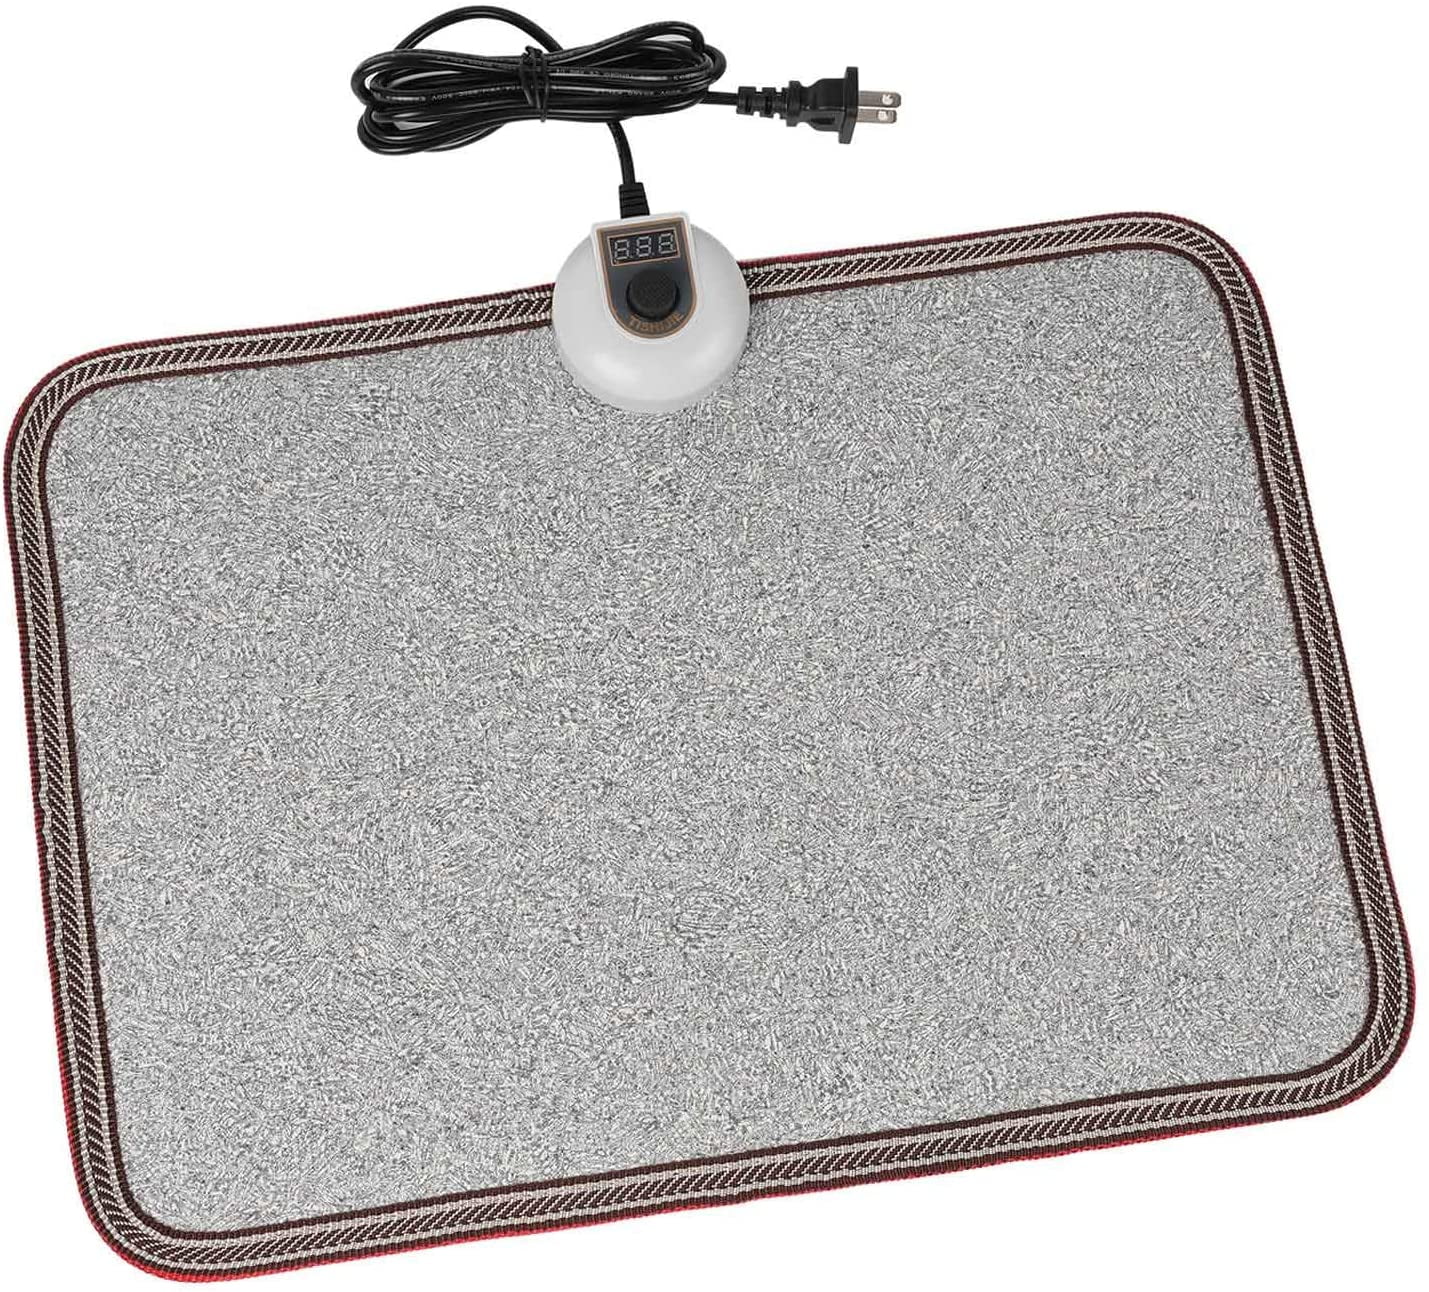 Weloille Heated Floor Mat - Foot Warmer Under Desk, 11.8x19.7in Heated Feet  Relaxation For Home Office Desk, Winter 110V Electric Heating Pad With 3  Timers 